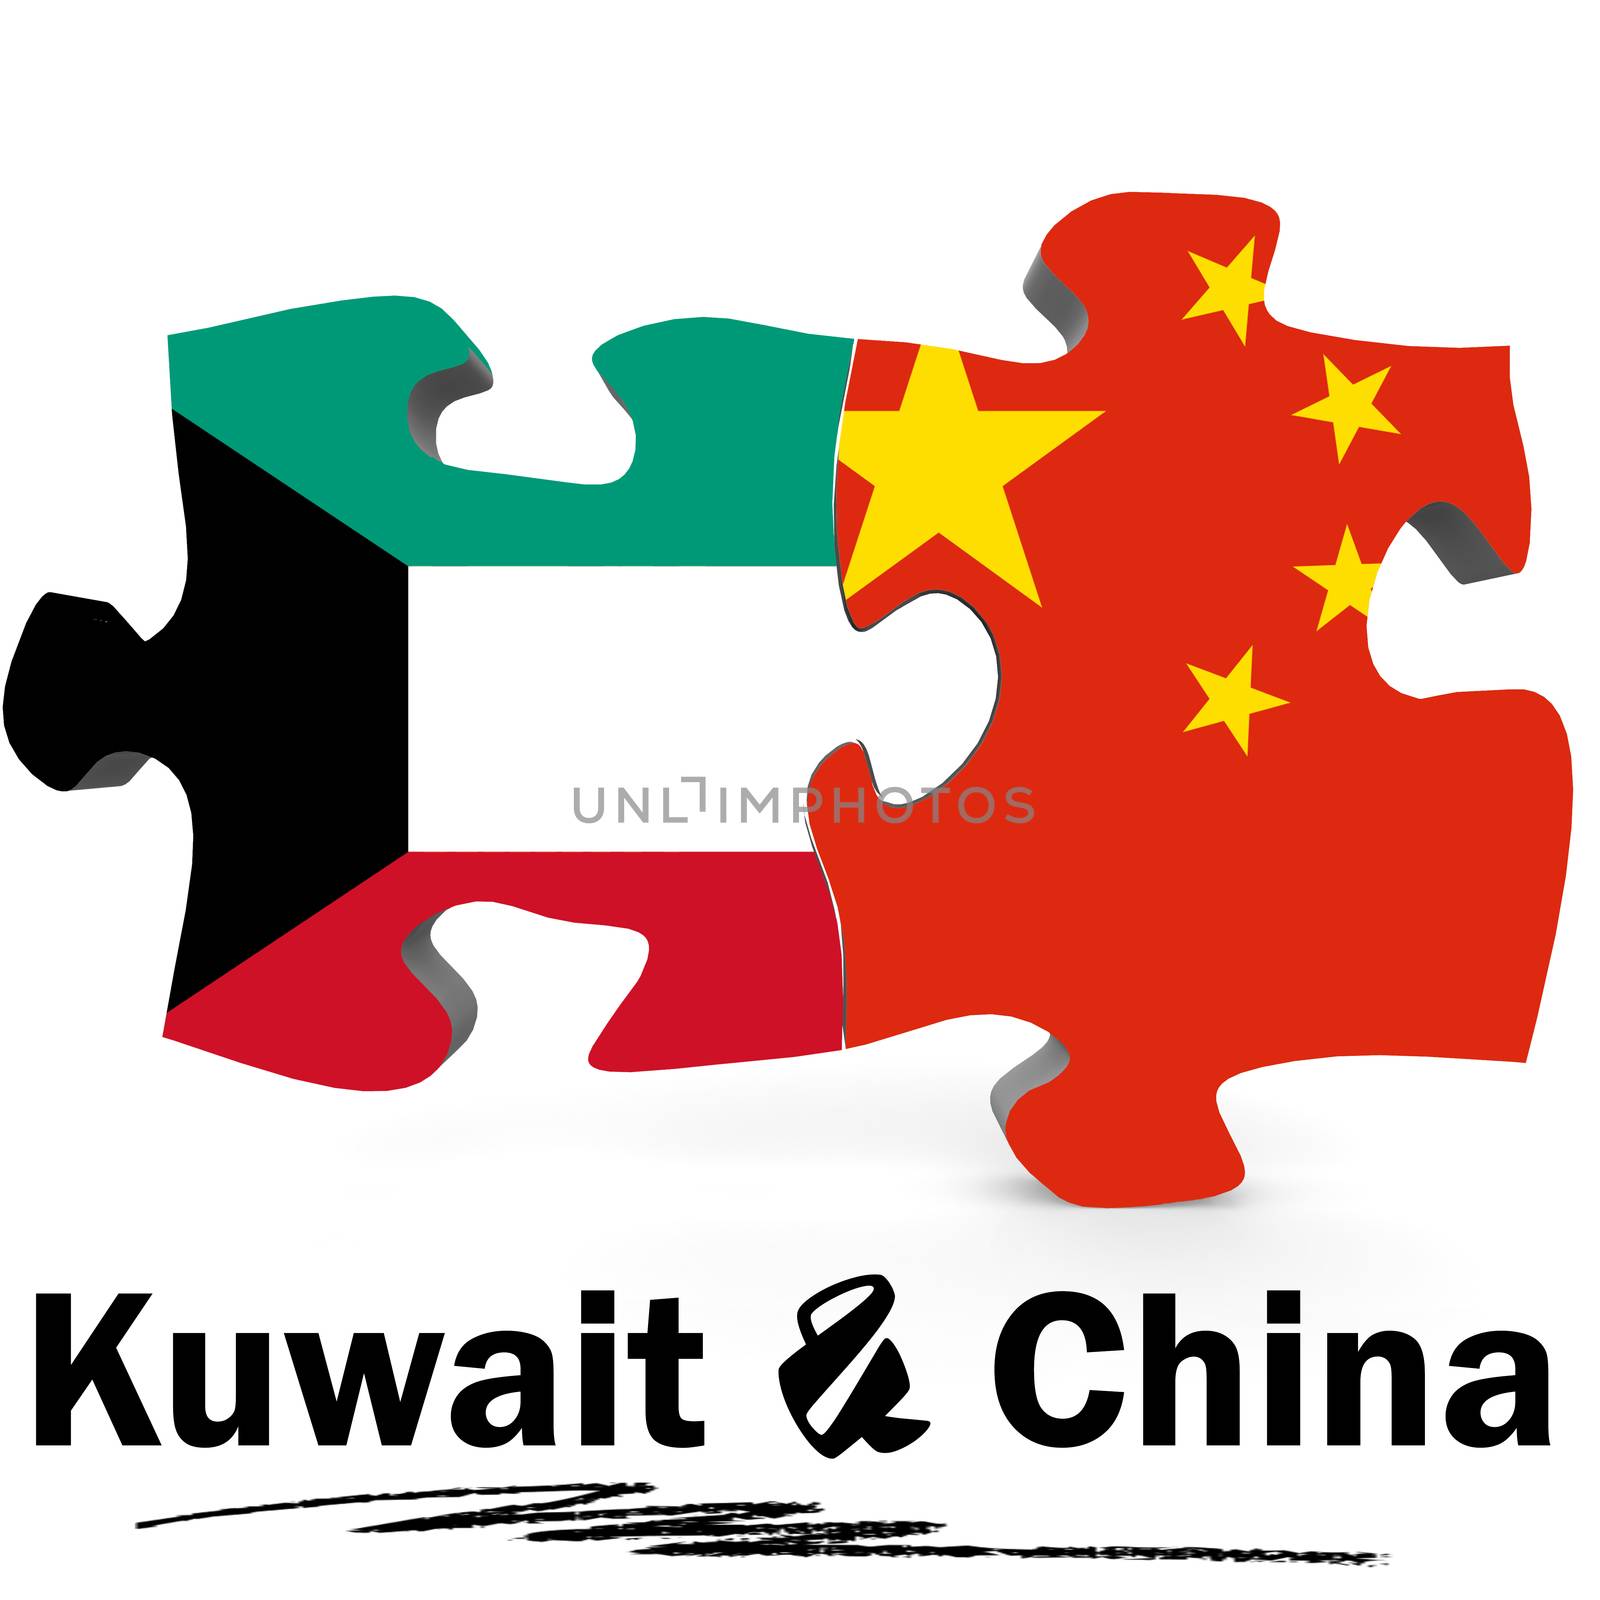 China and Kuwait Flags in puzzle isolated on white background, 3D rendering